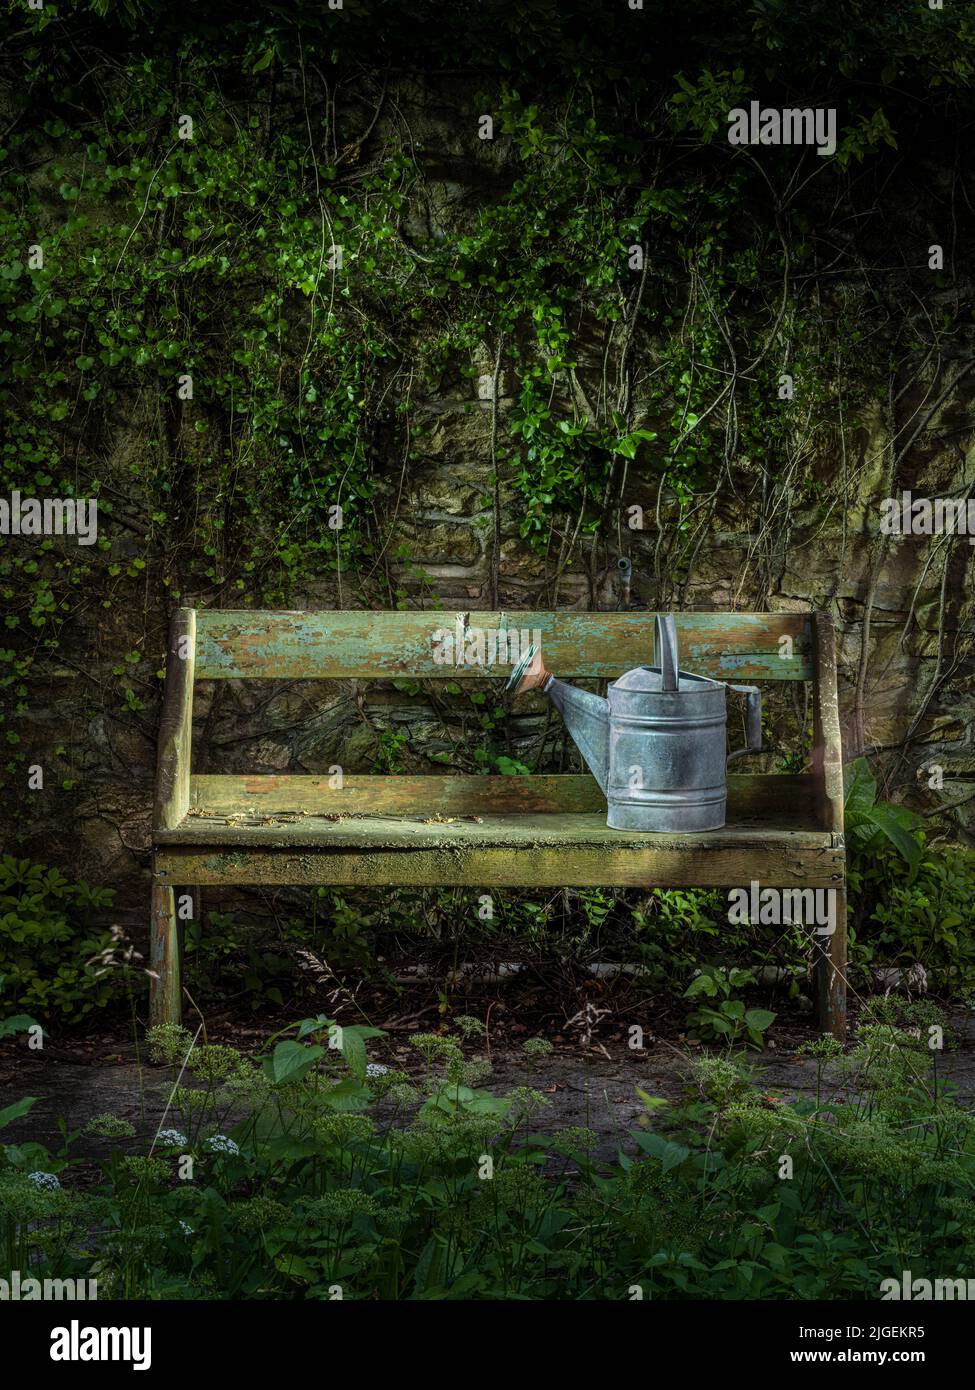 Antique watering can on old wooden bench in neglected garden, Pennsylvania, USA Stock Photo